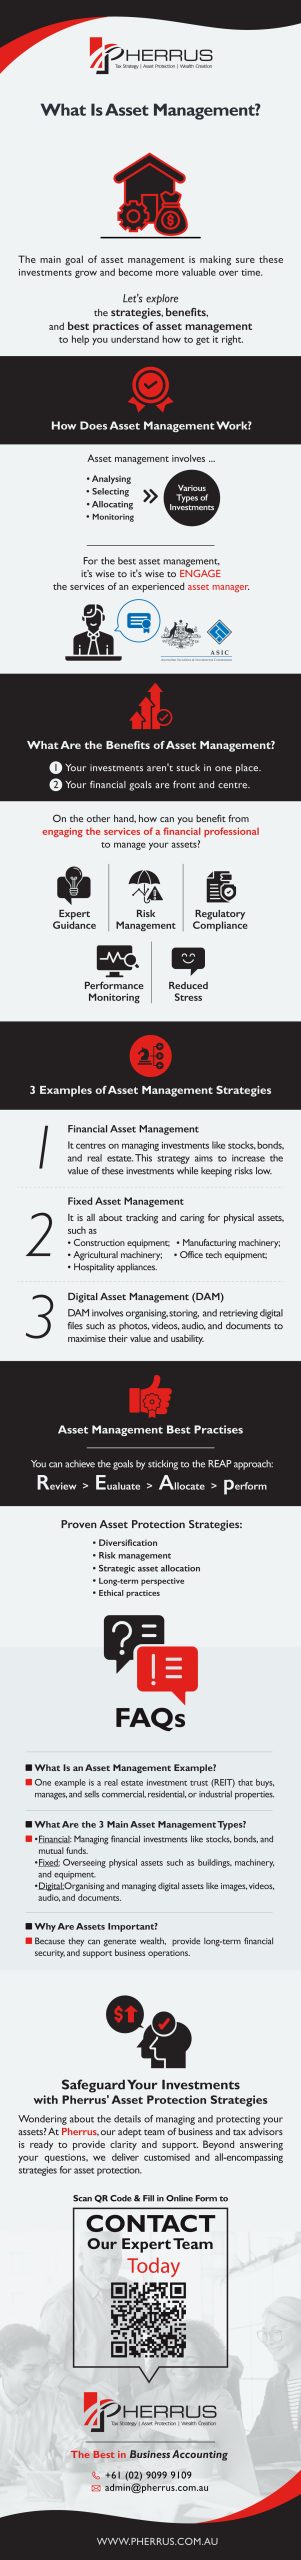 Summary What is Asset Management - Infographic